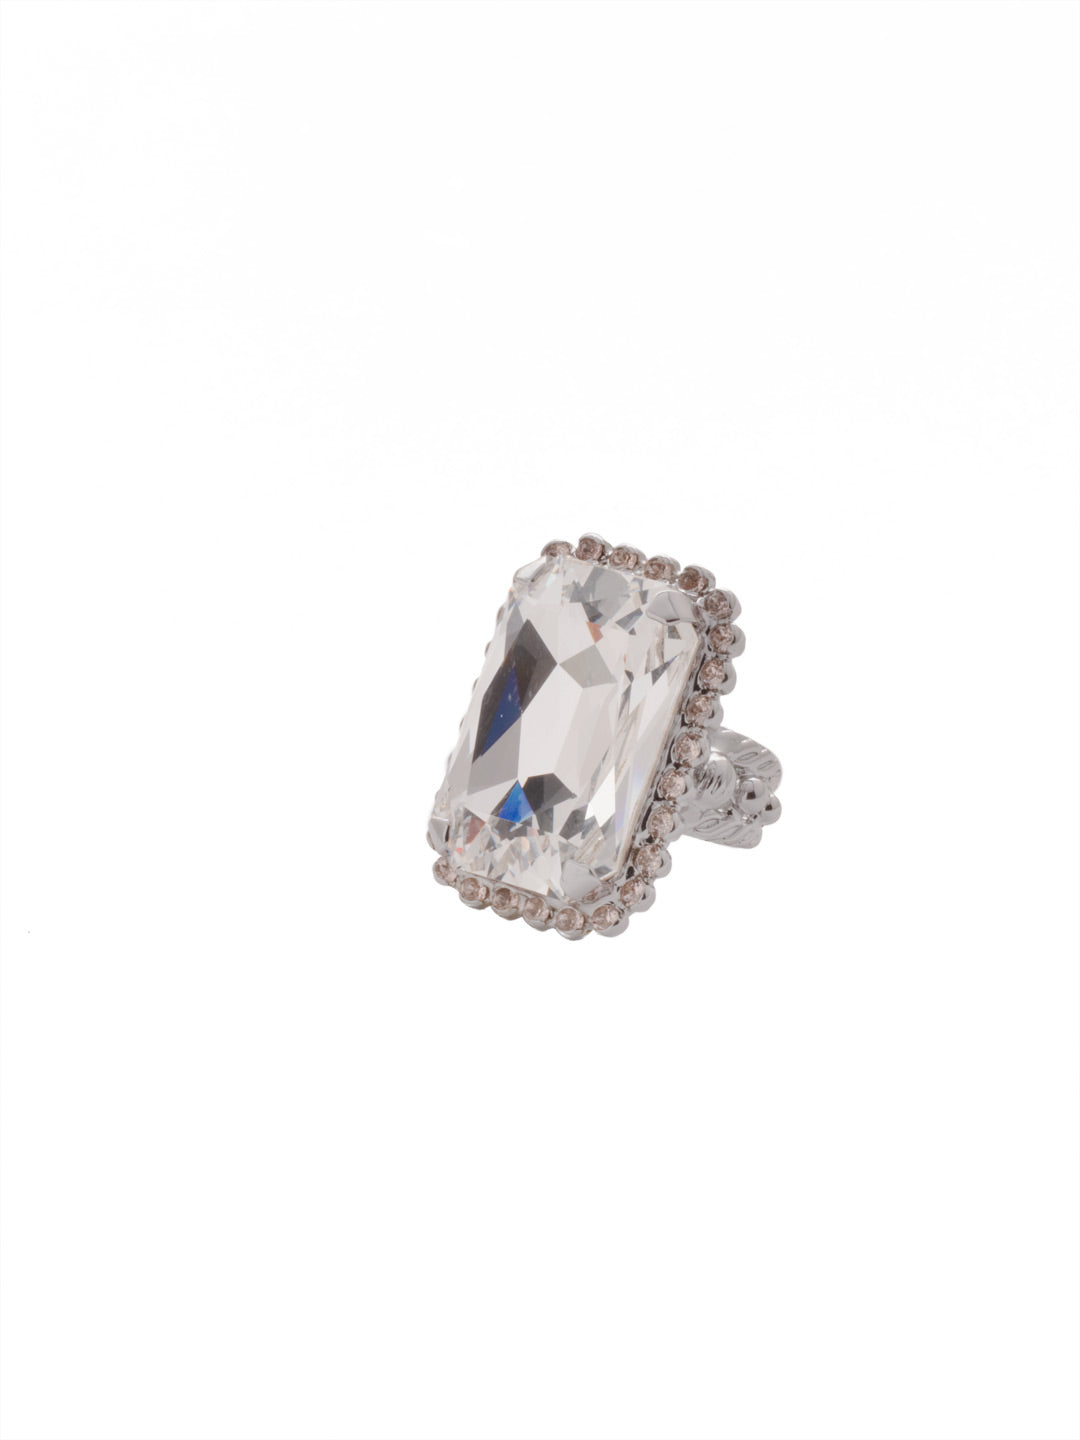 Luxurious Emerald-Cut Cocktail Ring - RBT69PDSNB - <p>Big, bold glamour! The large emerald cut crystal of this cocktail ring will leave all eyes on you! From Sorrelli's Snow Bunny collection in our Palladium finish.</p>